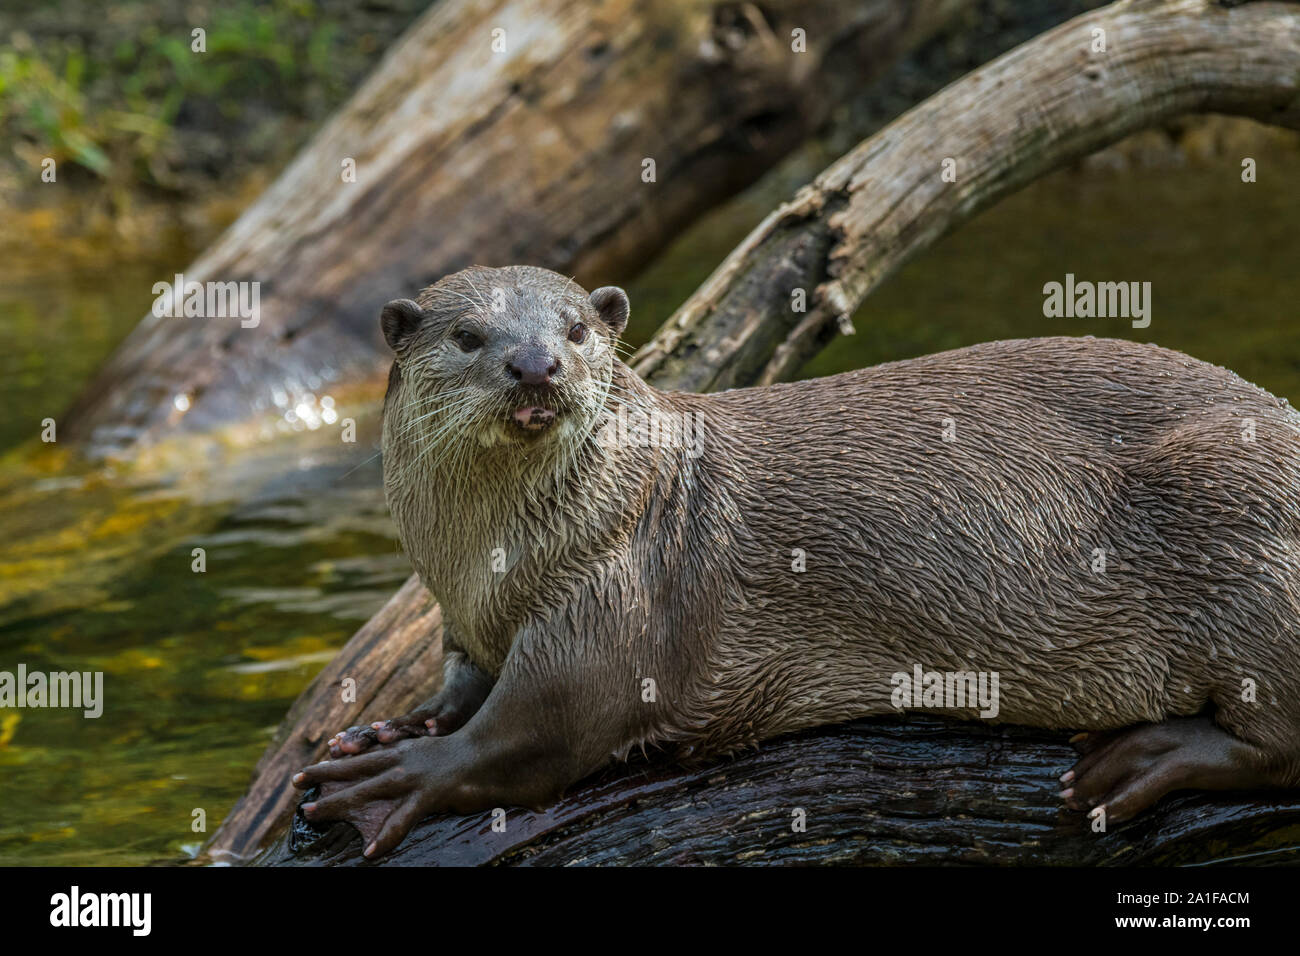 Smooth-coated otter (Lutrogale perspicillata / Lutra perspicillata) on river bank, native to the Indian subcontinent and Southeast Asia Stock Photo